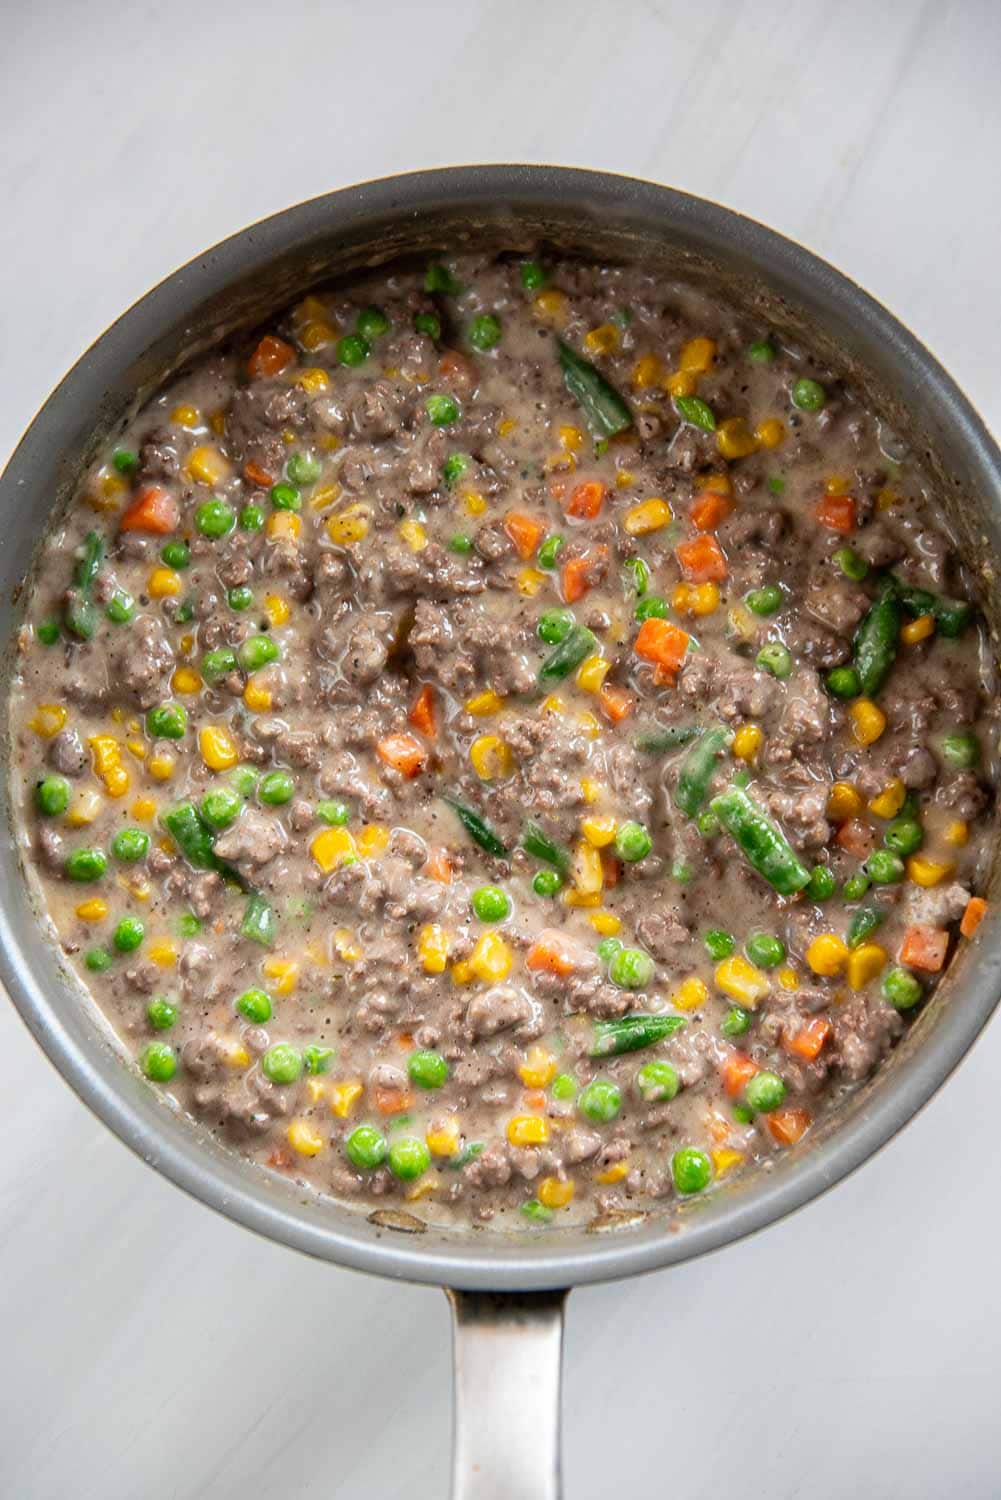 ground beef cooked and thickened with mixed vegetables like peas, green beans, and carrots in skillet